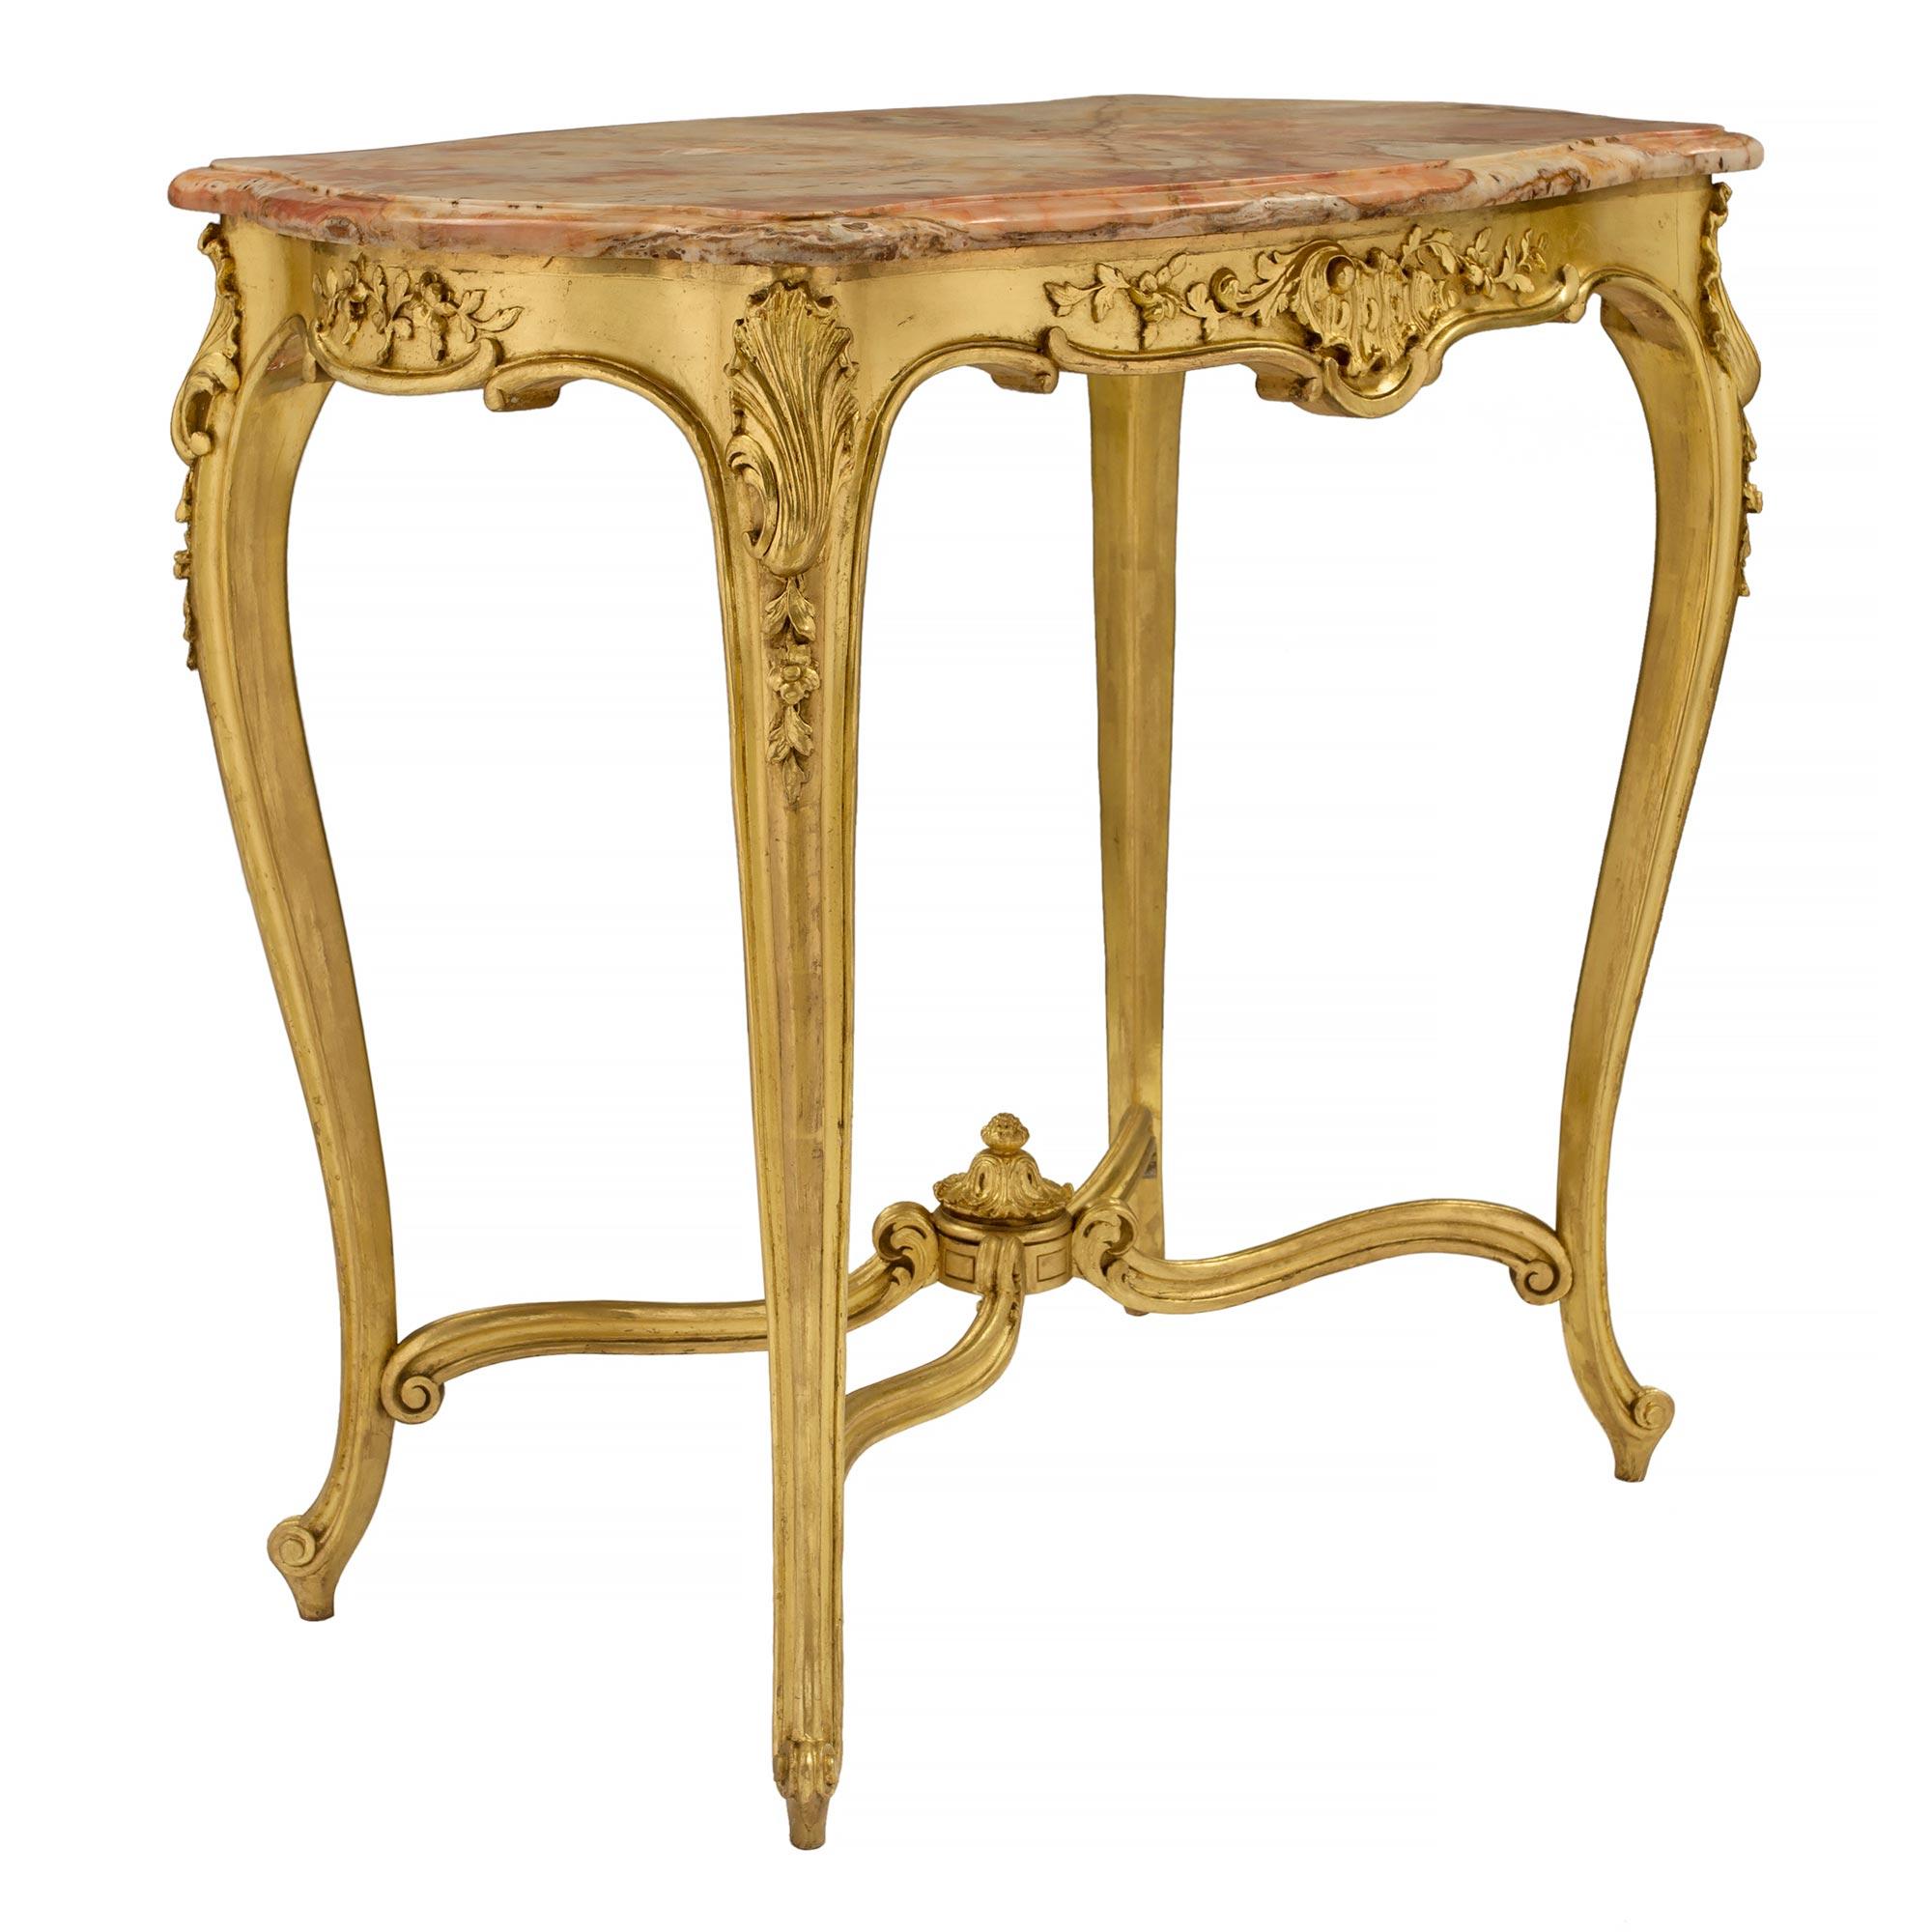 French 19th Century Louis XV Style Giltwood and Marble Side/Center Table In Good Condition For Sale In West Palm Beach, FL